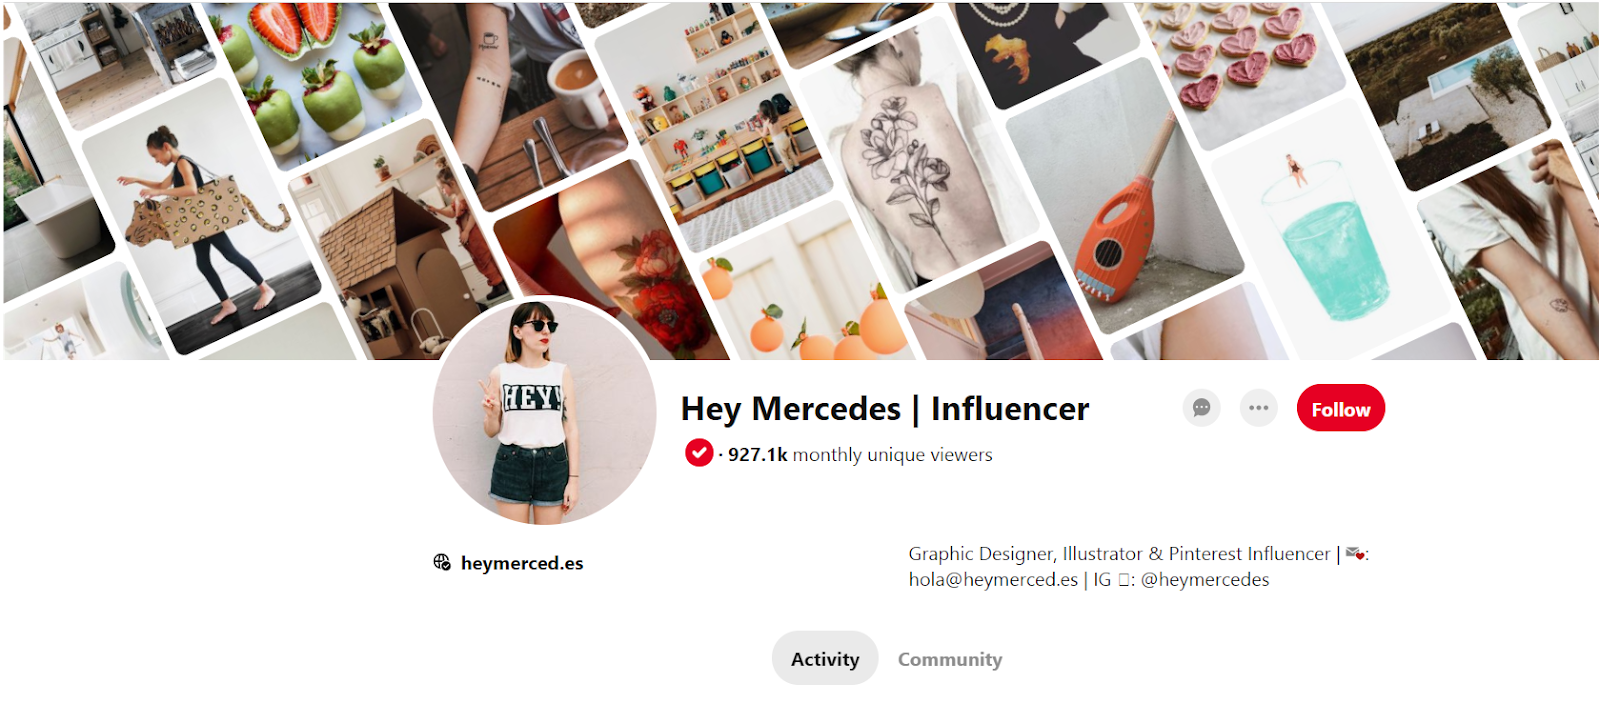 A screenshot of a Pinterest profile featuring a background picture presenting the types of content that users can find on the page
